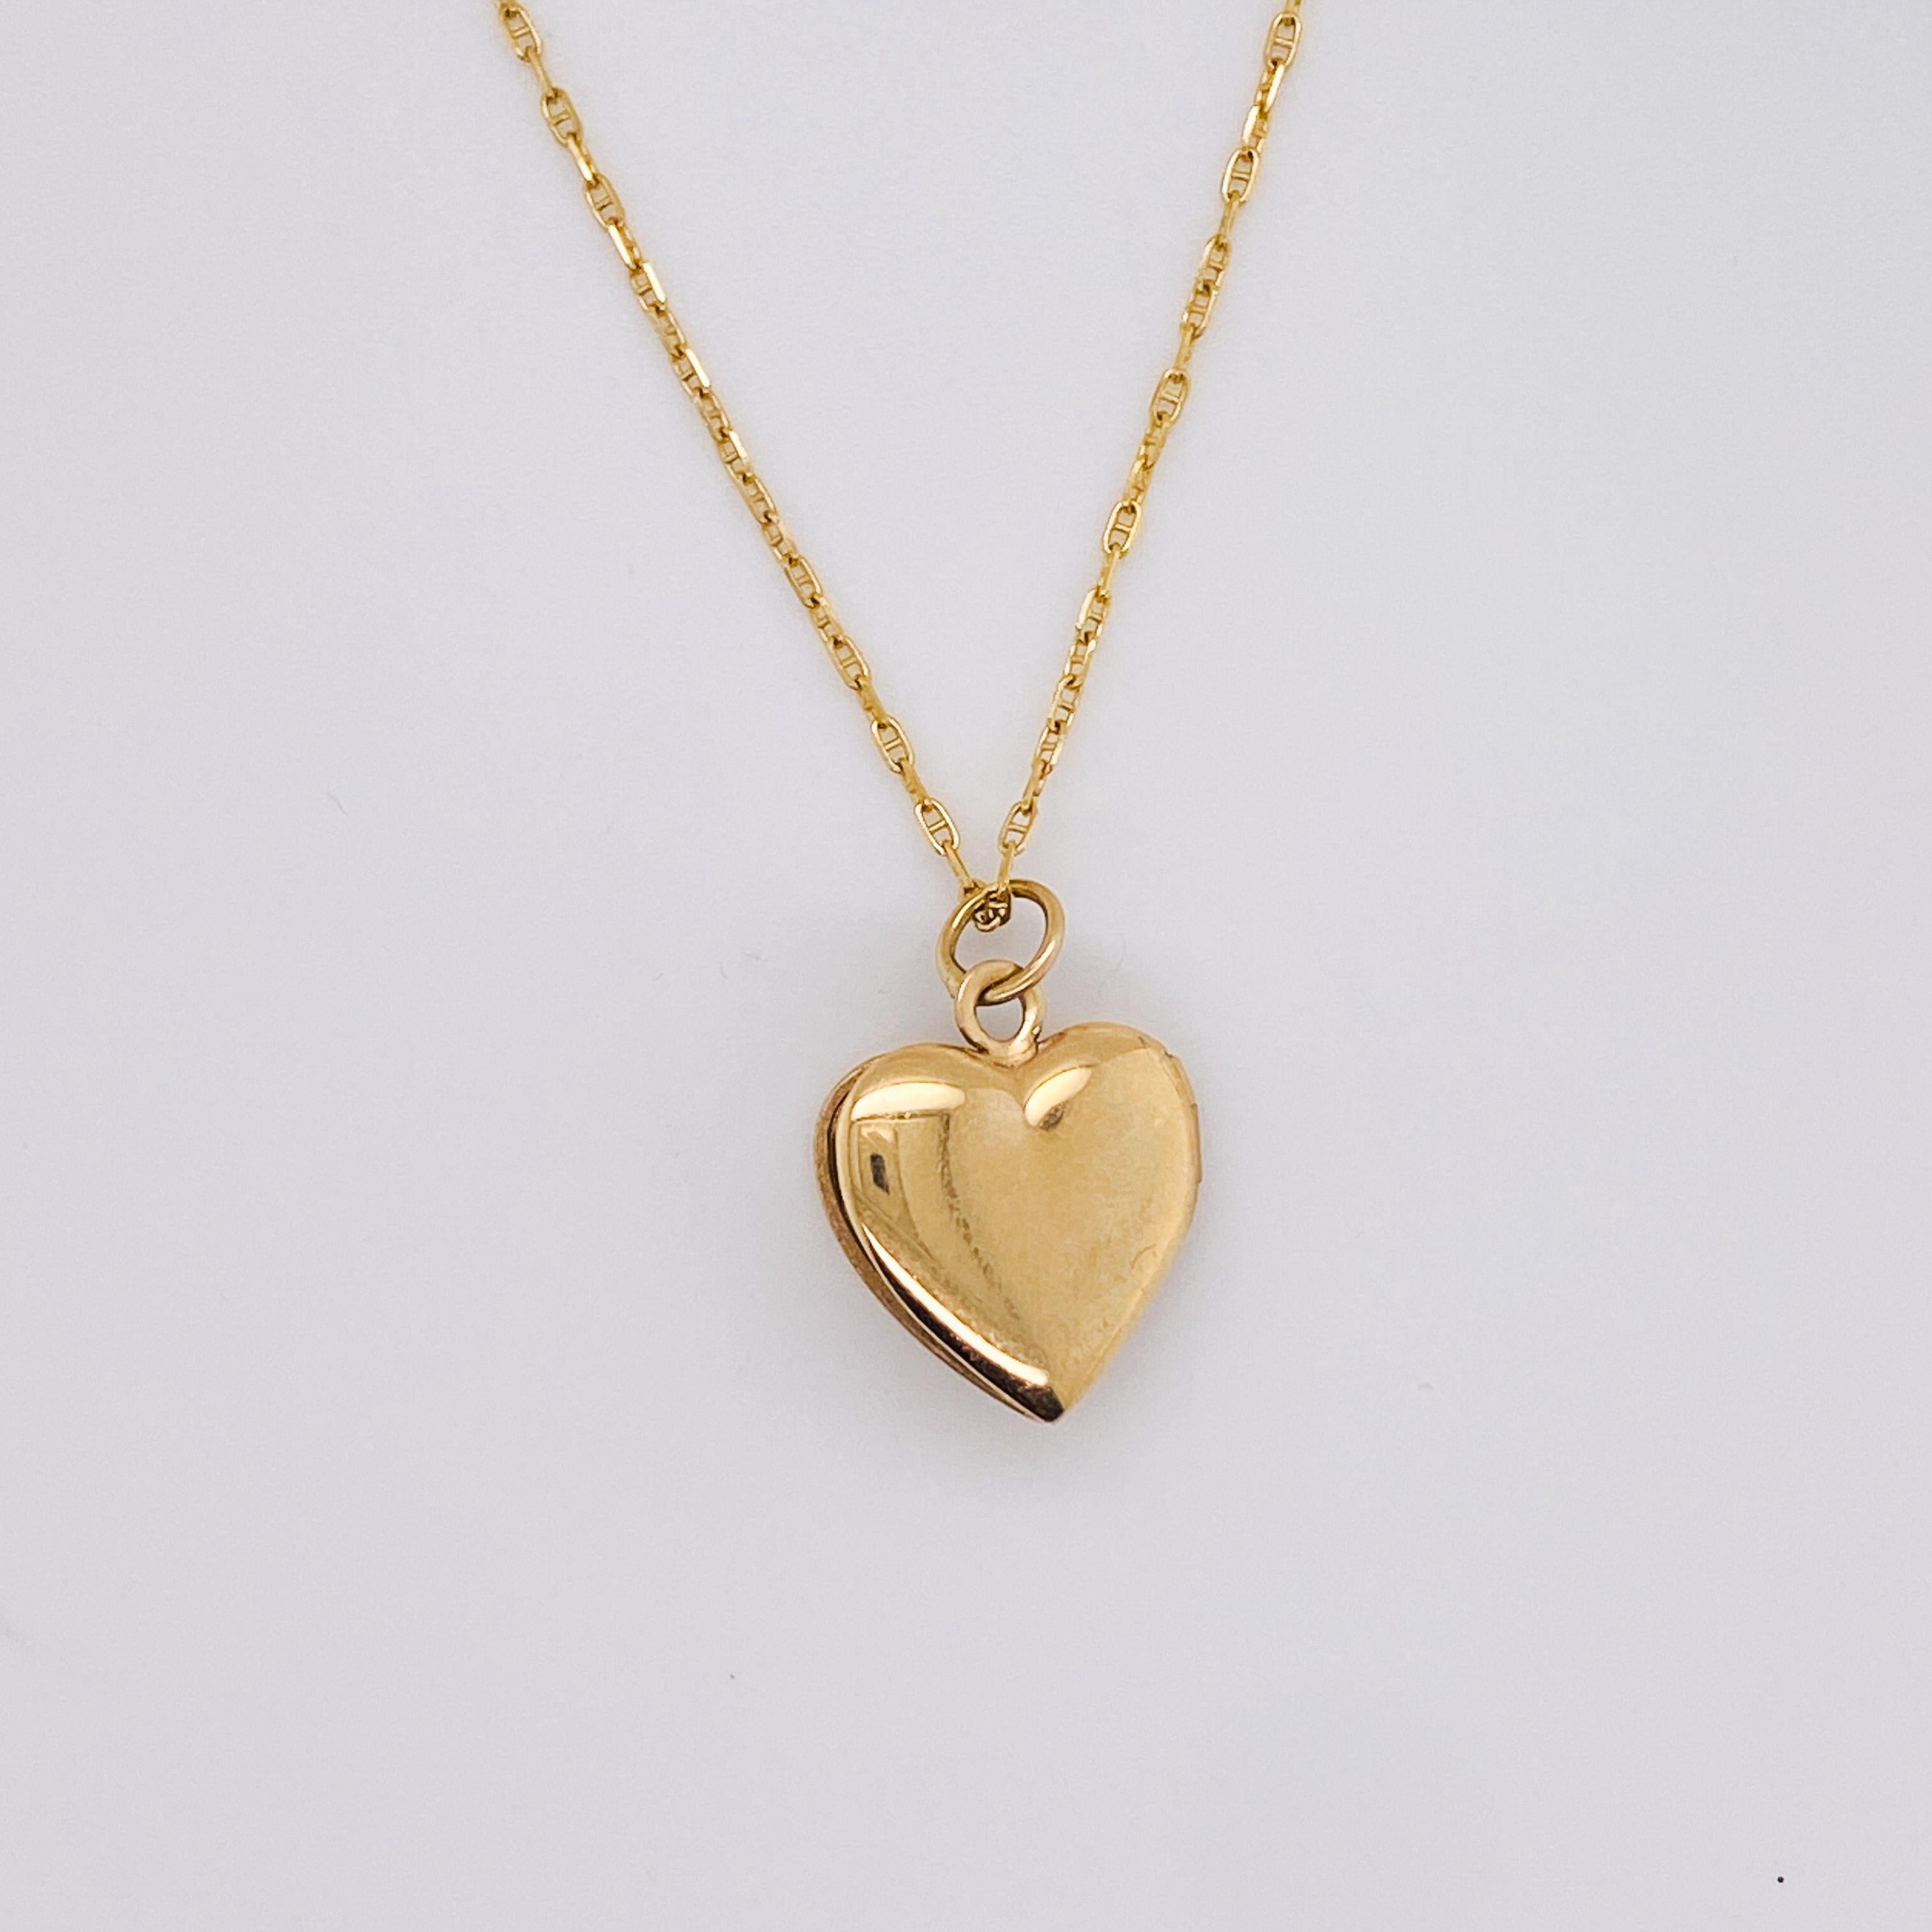 Single Cut Vintage Heart Diamond Locket Necklace in 14K Yellow Gold with Anchor Link Chain For Sale